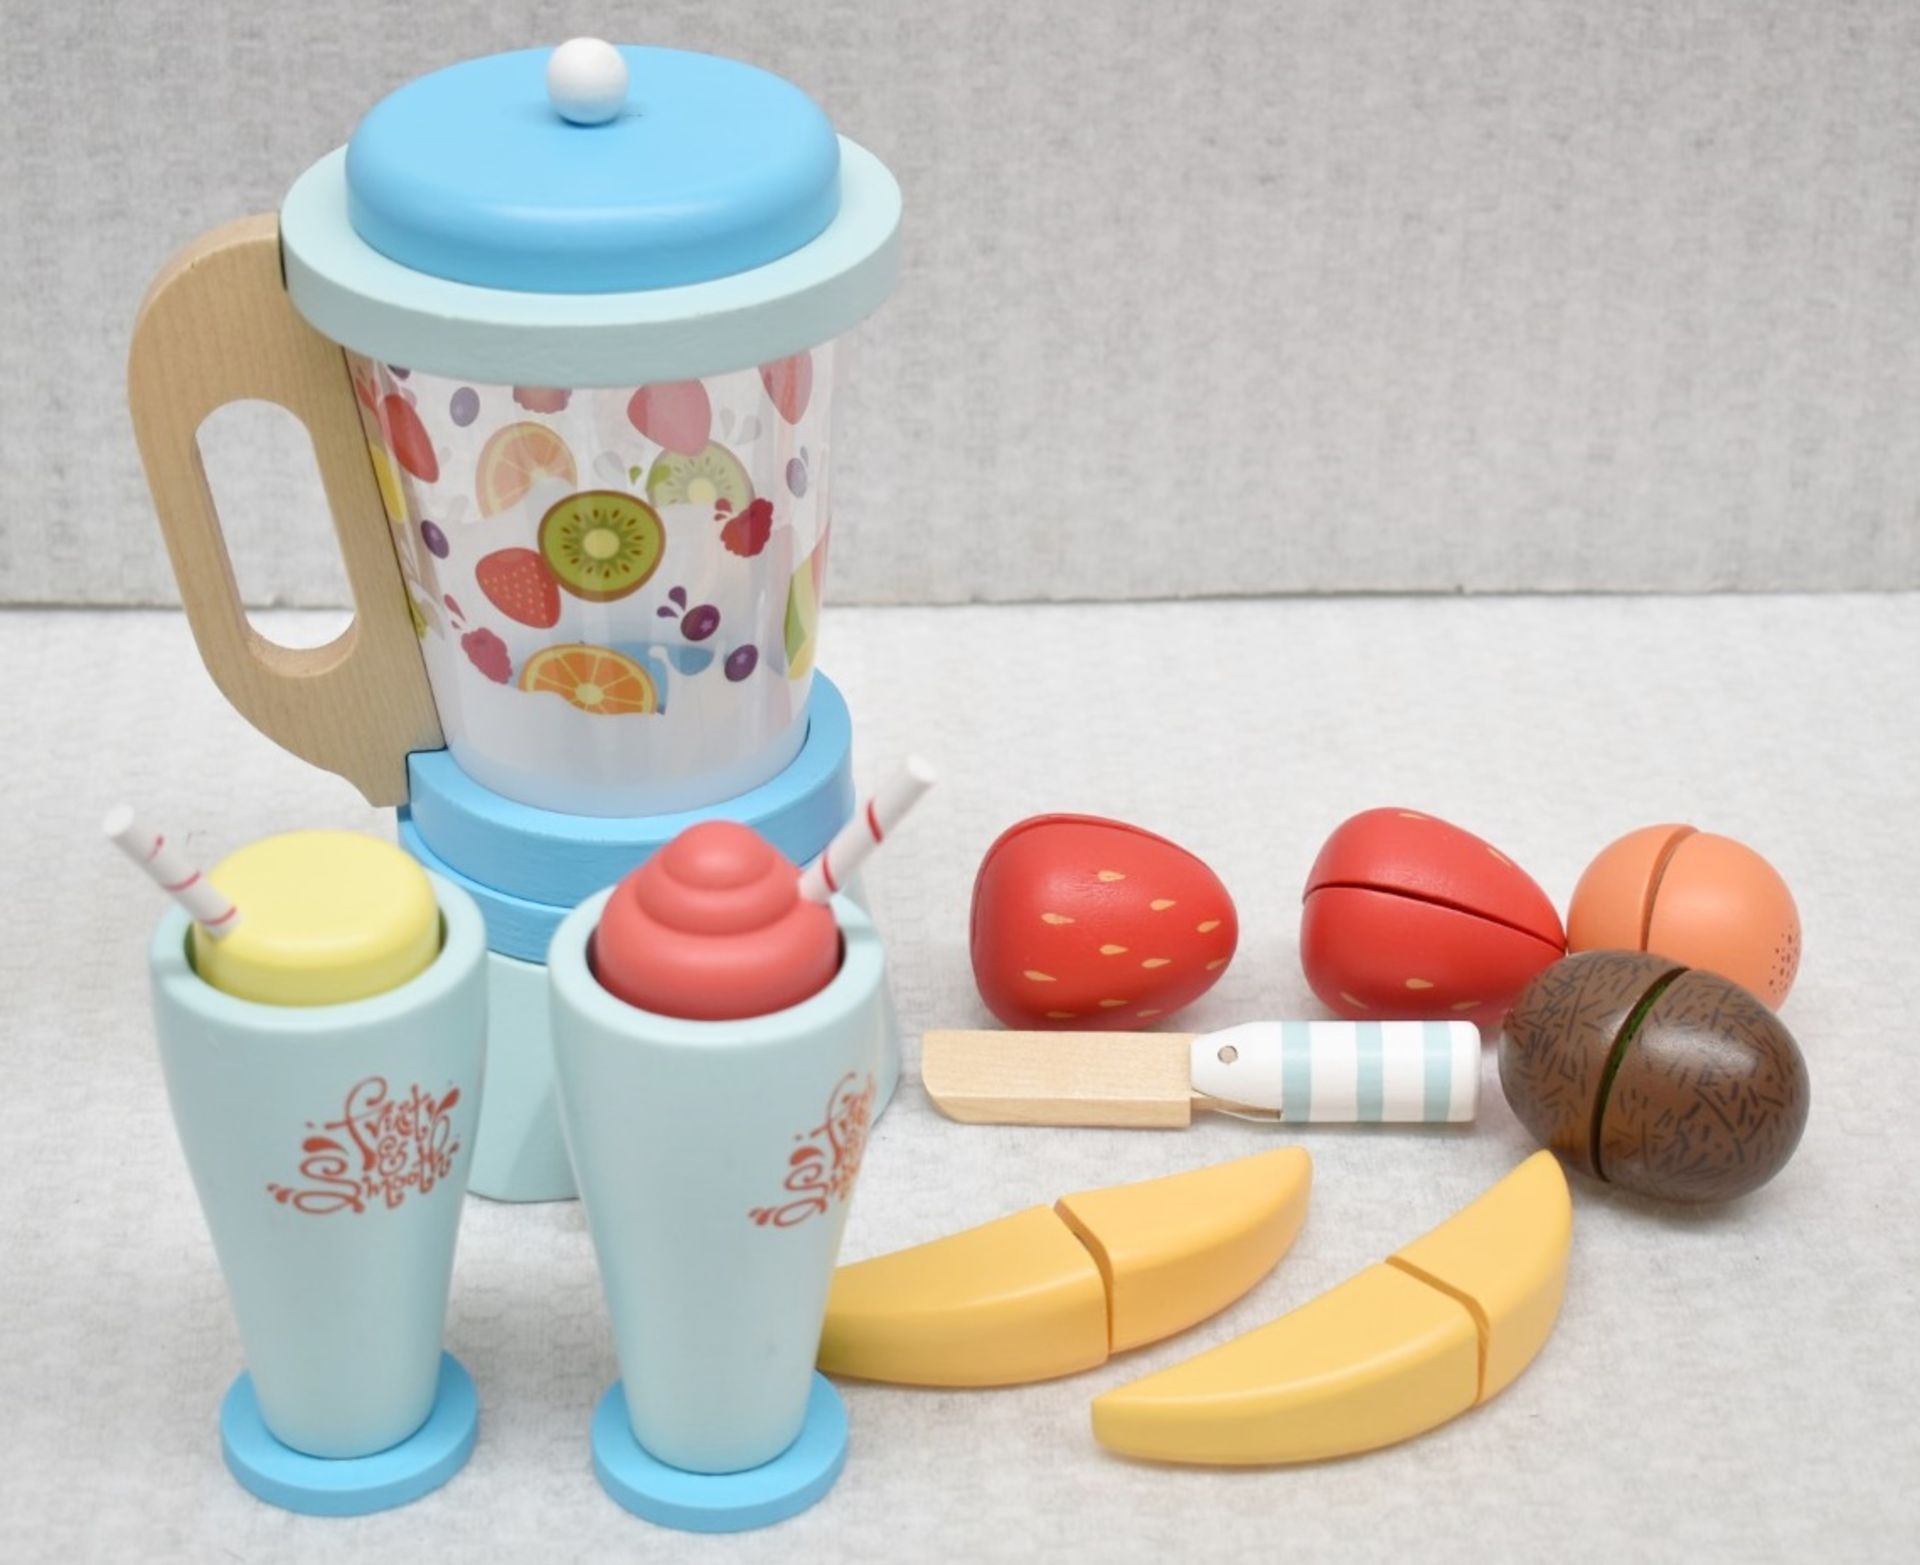 1 x LE TOY VAN Wooden Toy Blender Fruit Smooth Play Set - Unused Boxed Stock - Ref: HAS2317/WH2/ - Image 2 of 4